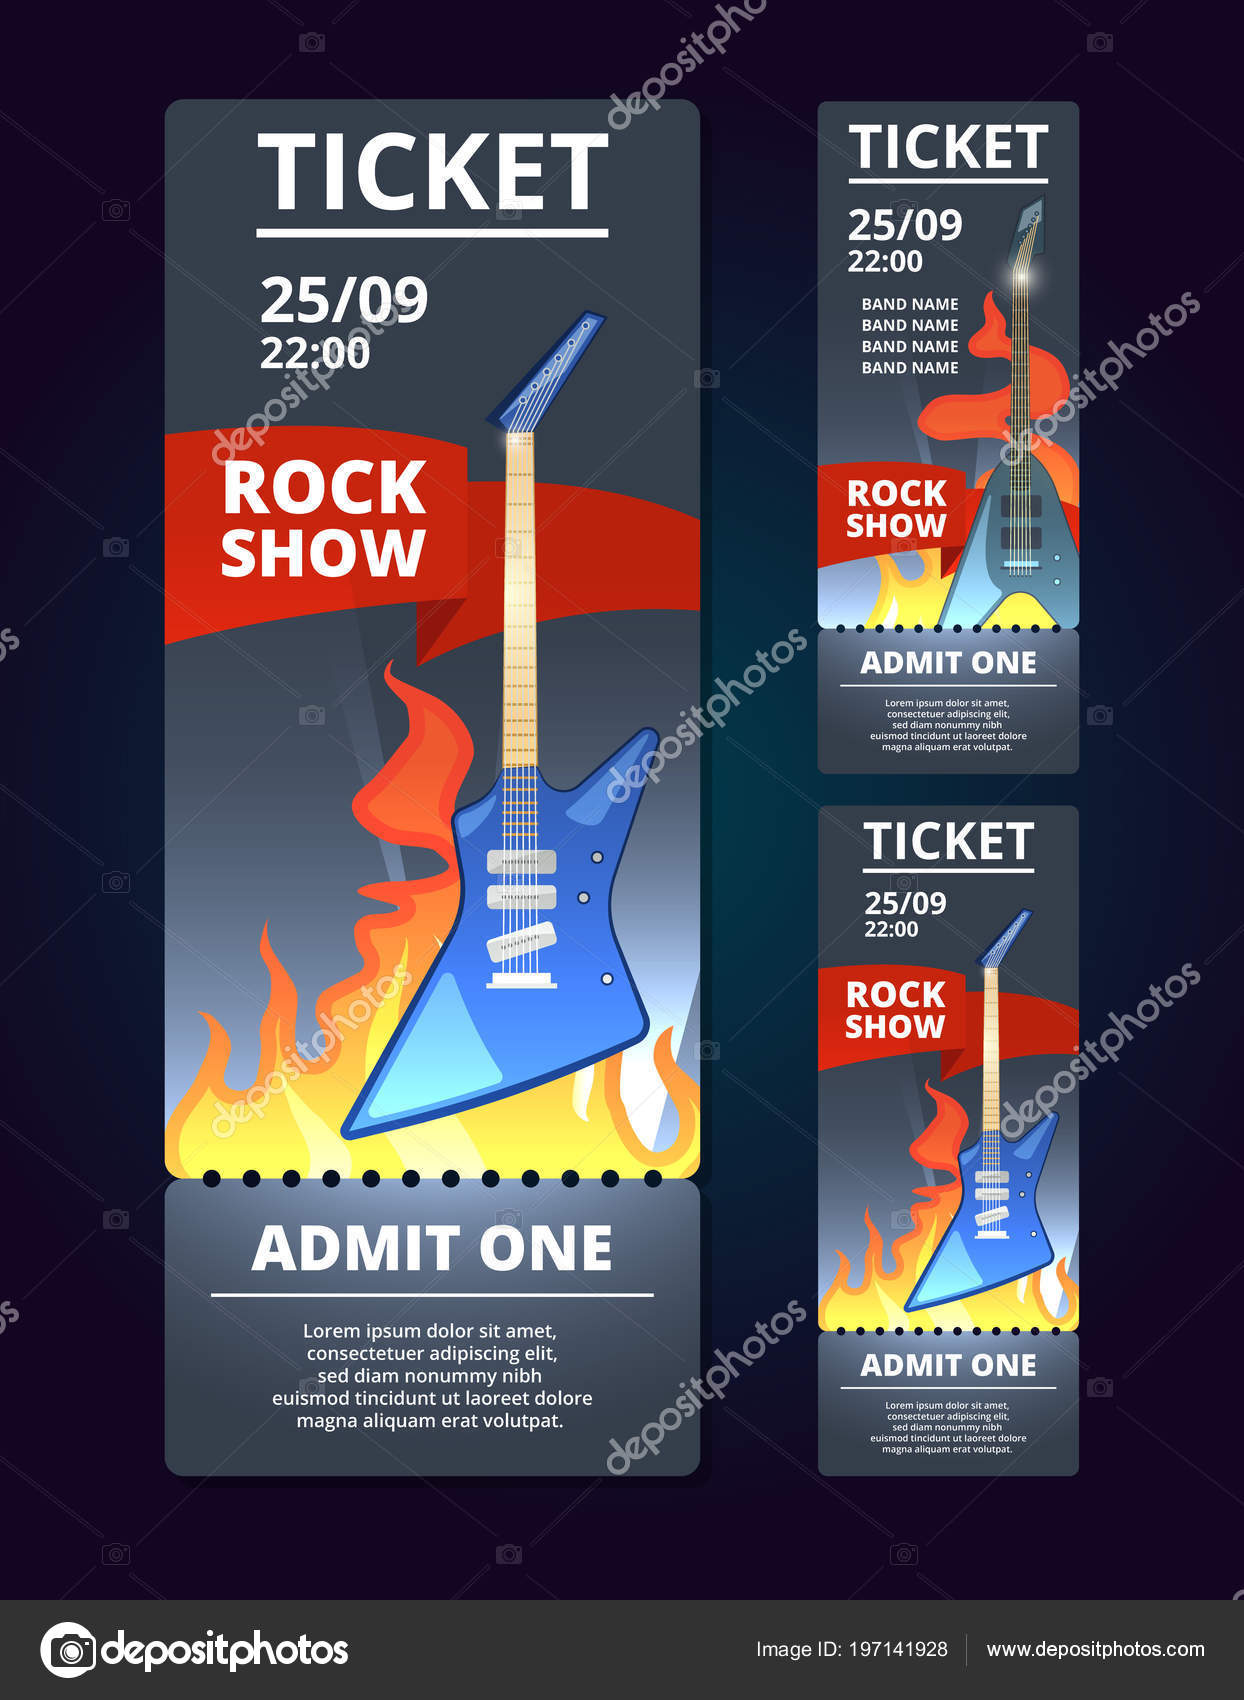 Ticket Design Template Of Music Event Poster Music With Illustration Of Rock Guitar Banner Of Music Concert Stock Vector C Onyxprj